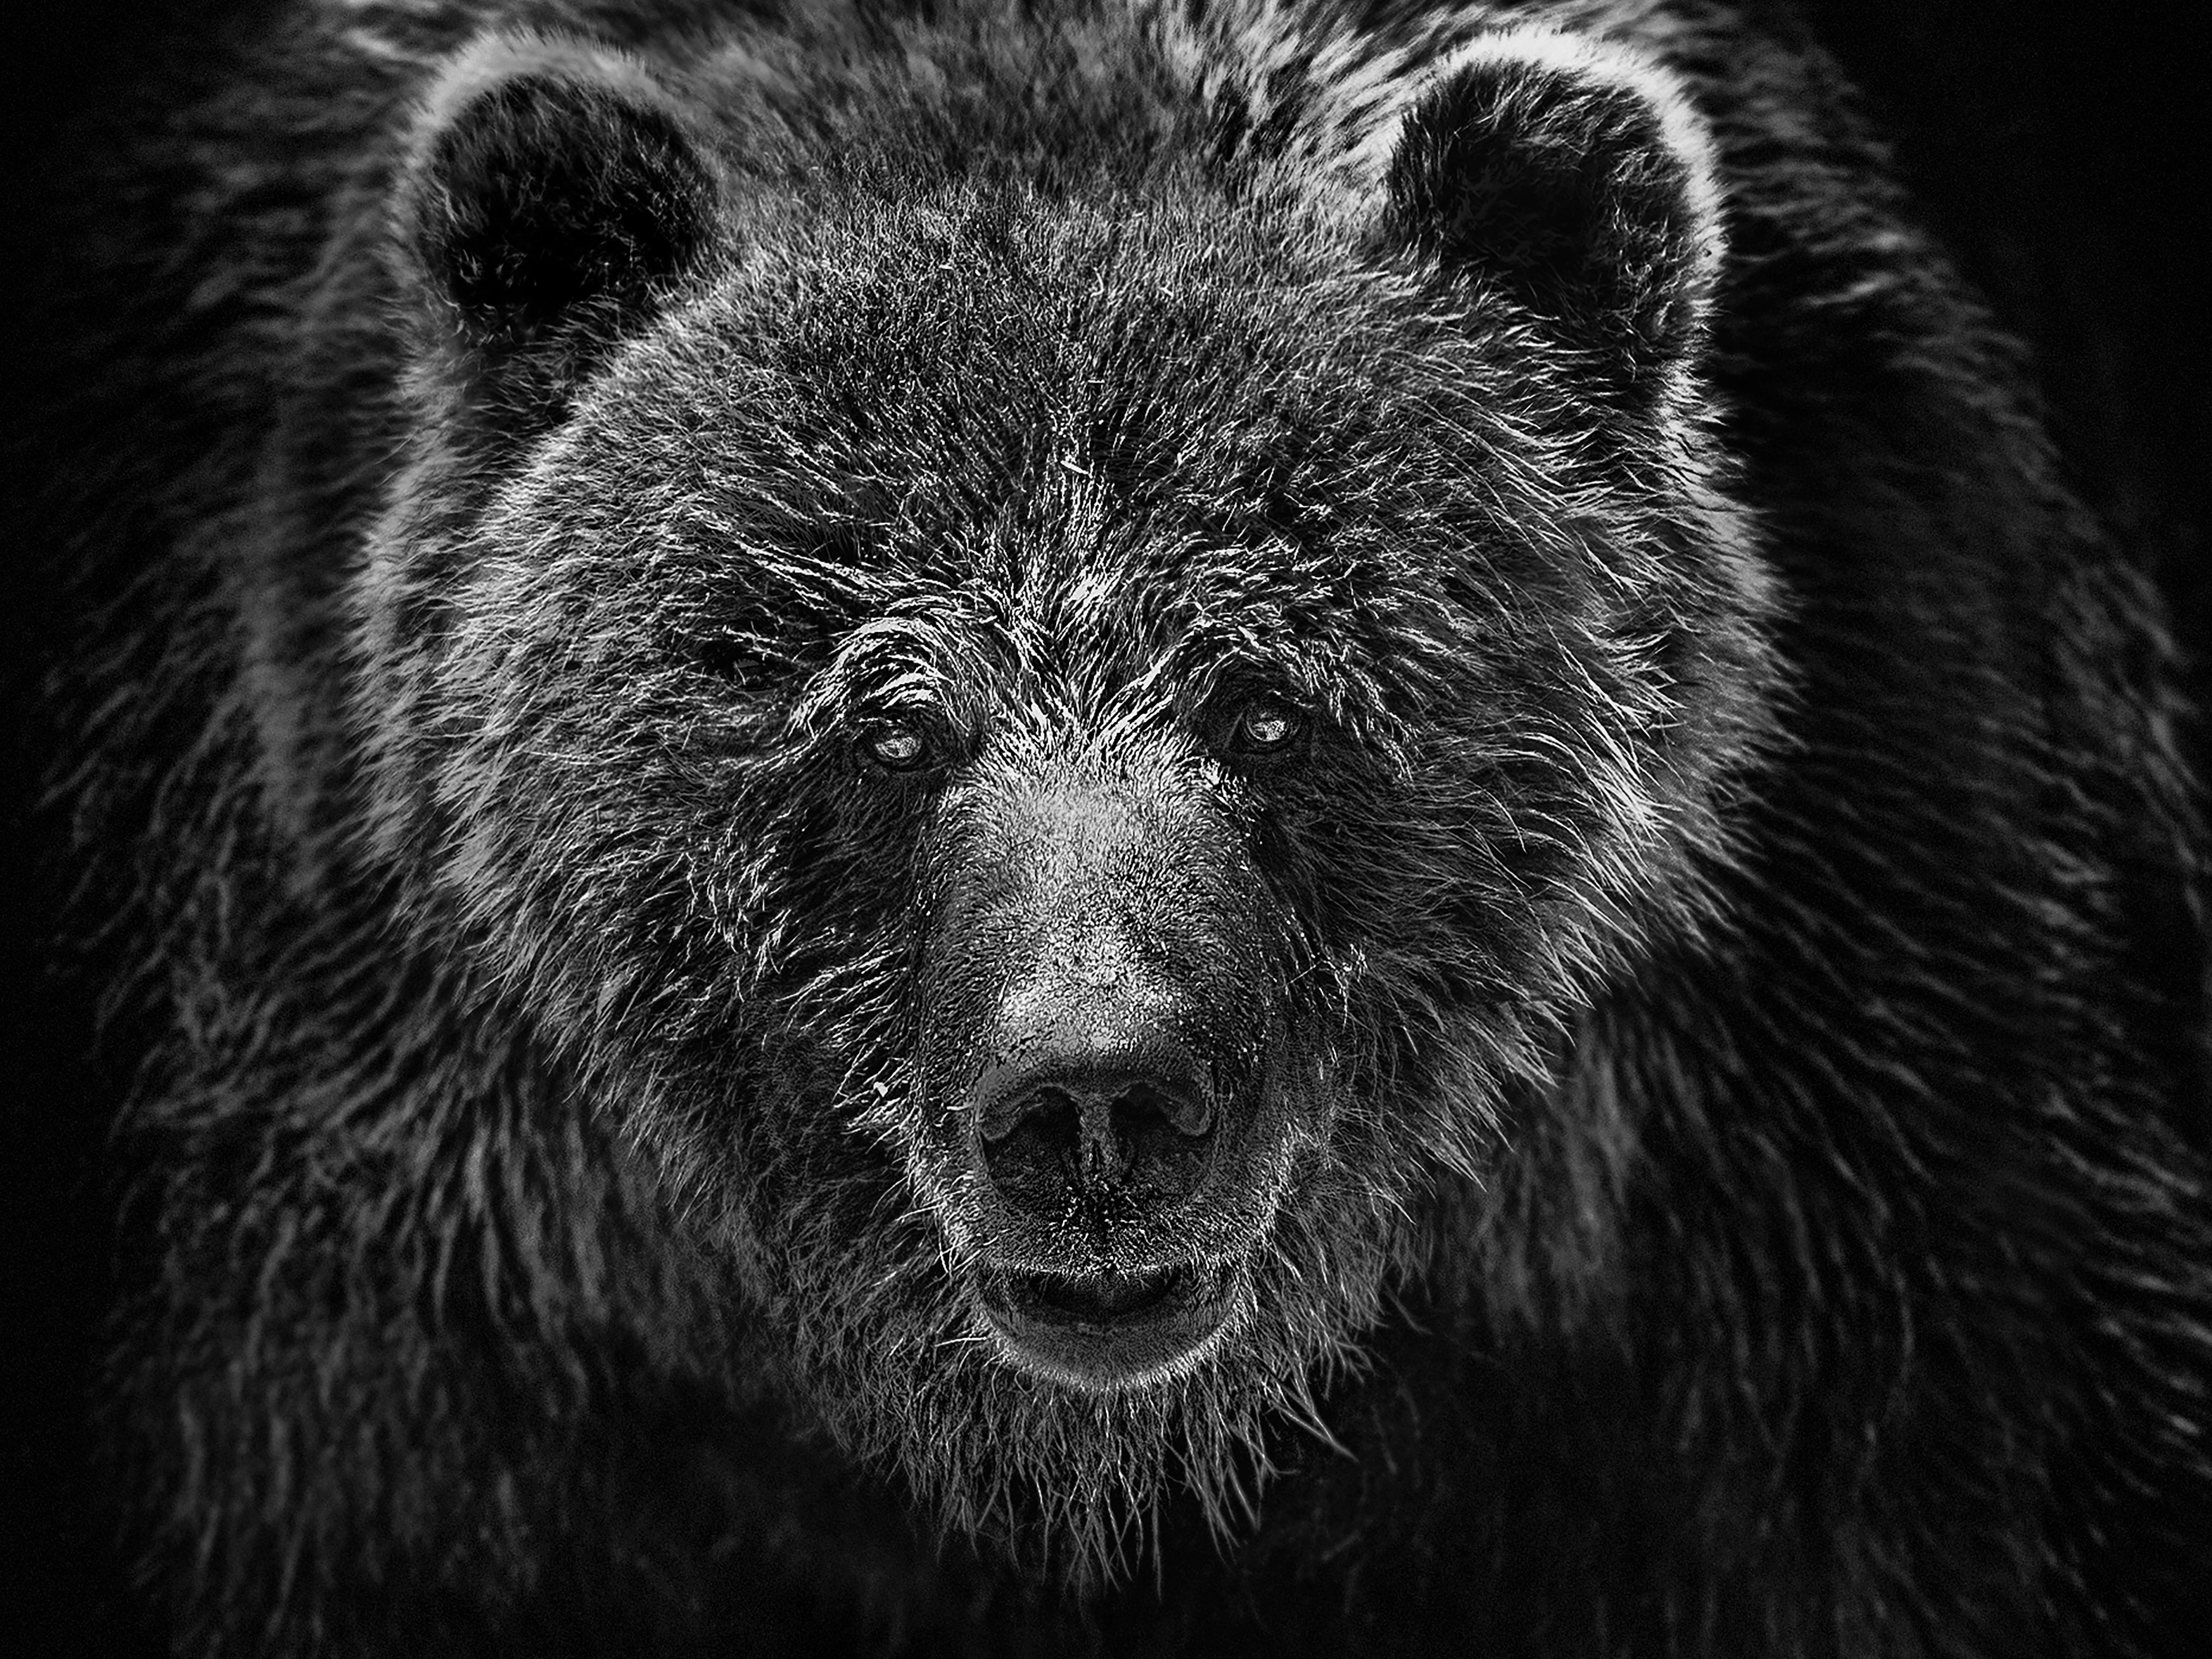 Shane Russeck Animal Print - "Grizzly Portrait" 18x24 - Black and White Photograph of a Grizzly Bear 